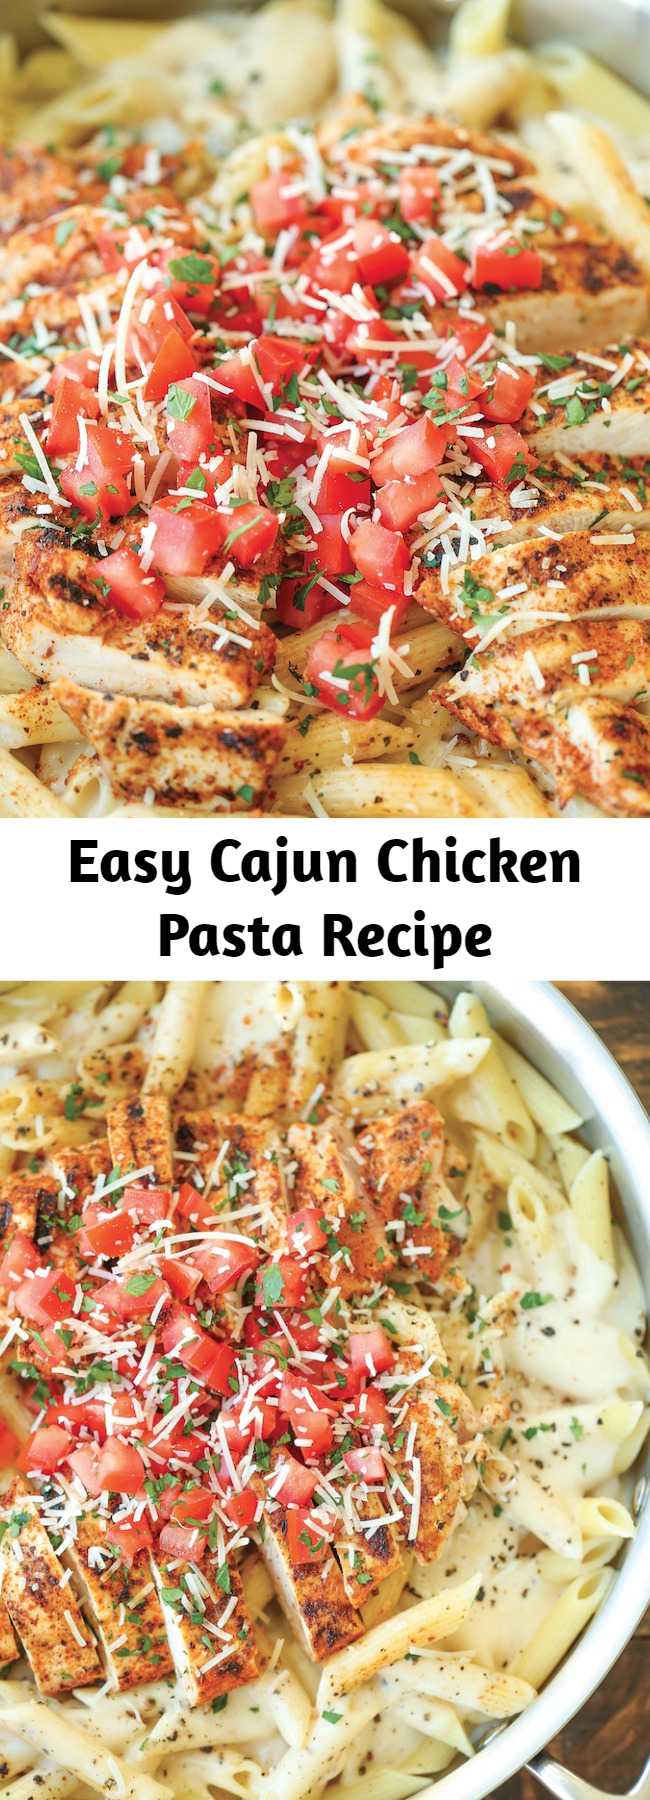 Easy Cajun Chicken Pasta Recipe - Chili’s copycat recipe made at home with an amazingly creamy melt-in-your-mouth alfredo sauce. And you know it tastes 10000x better!